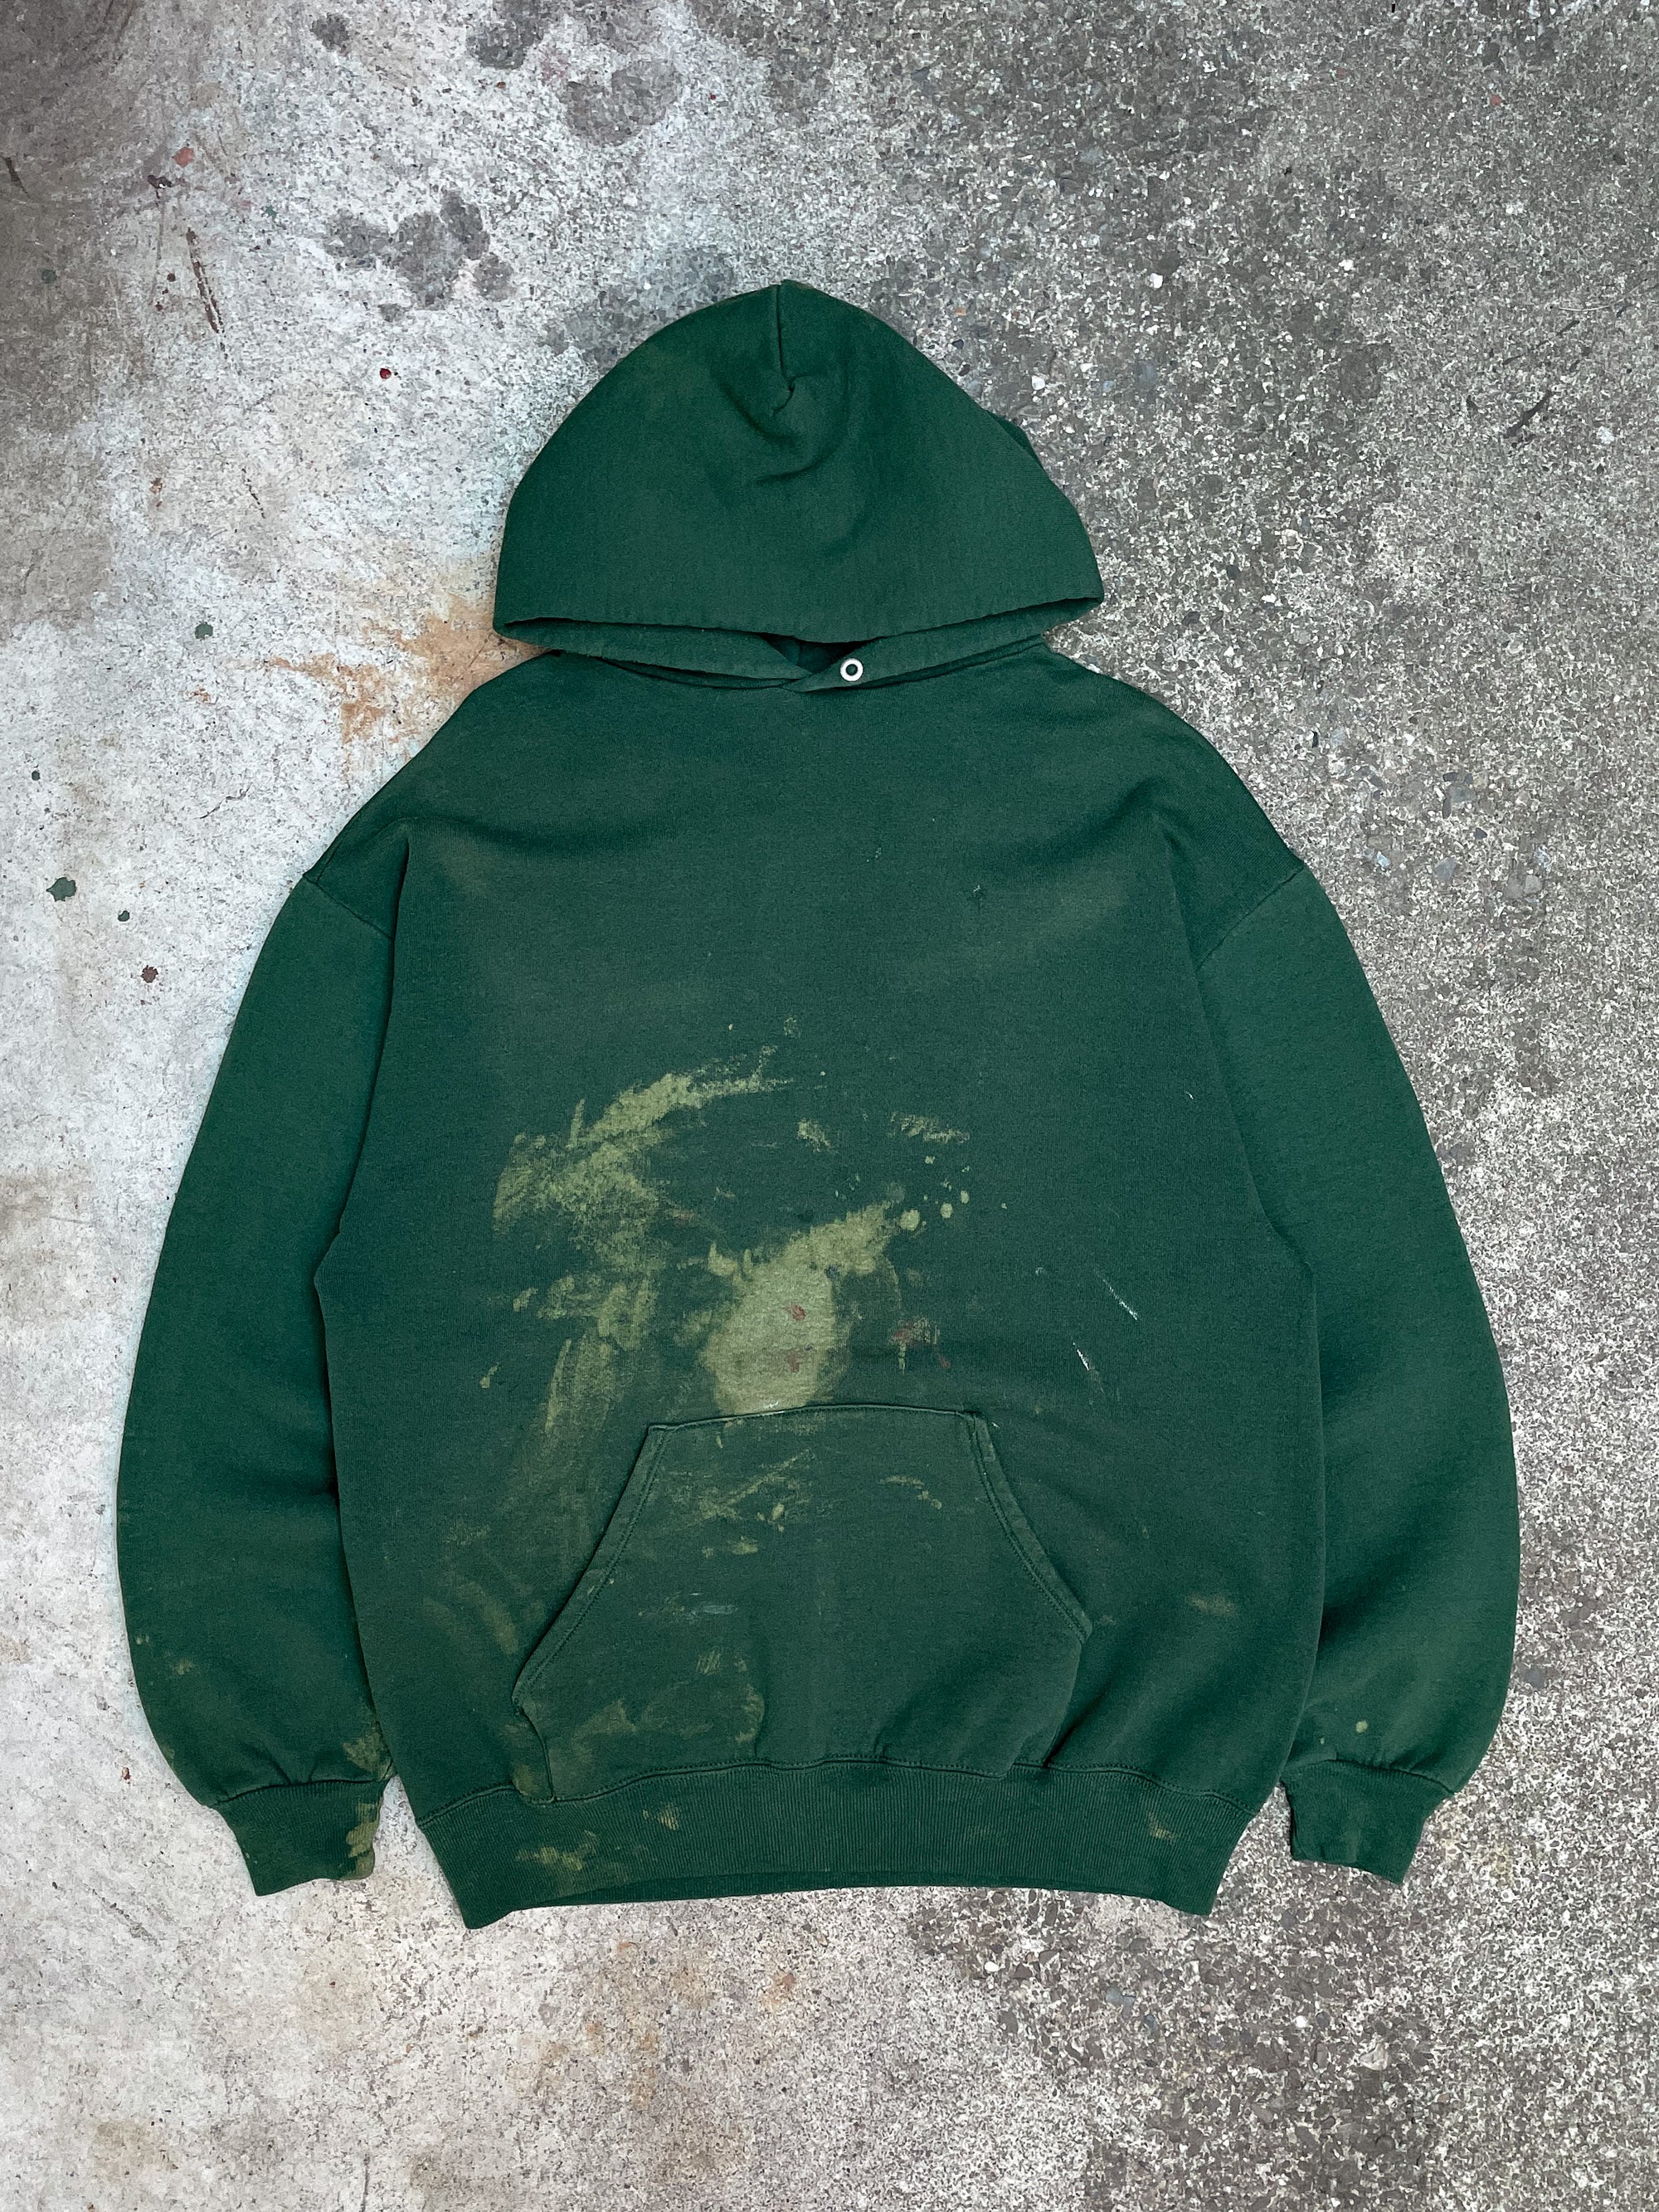 1980s Painted Faded Green Blank Hoodie (M/L)